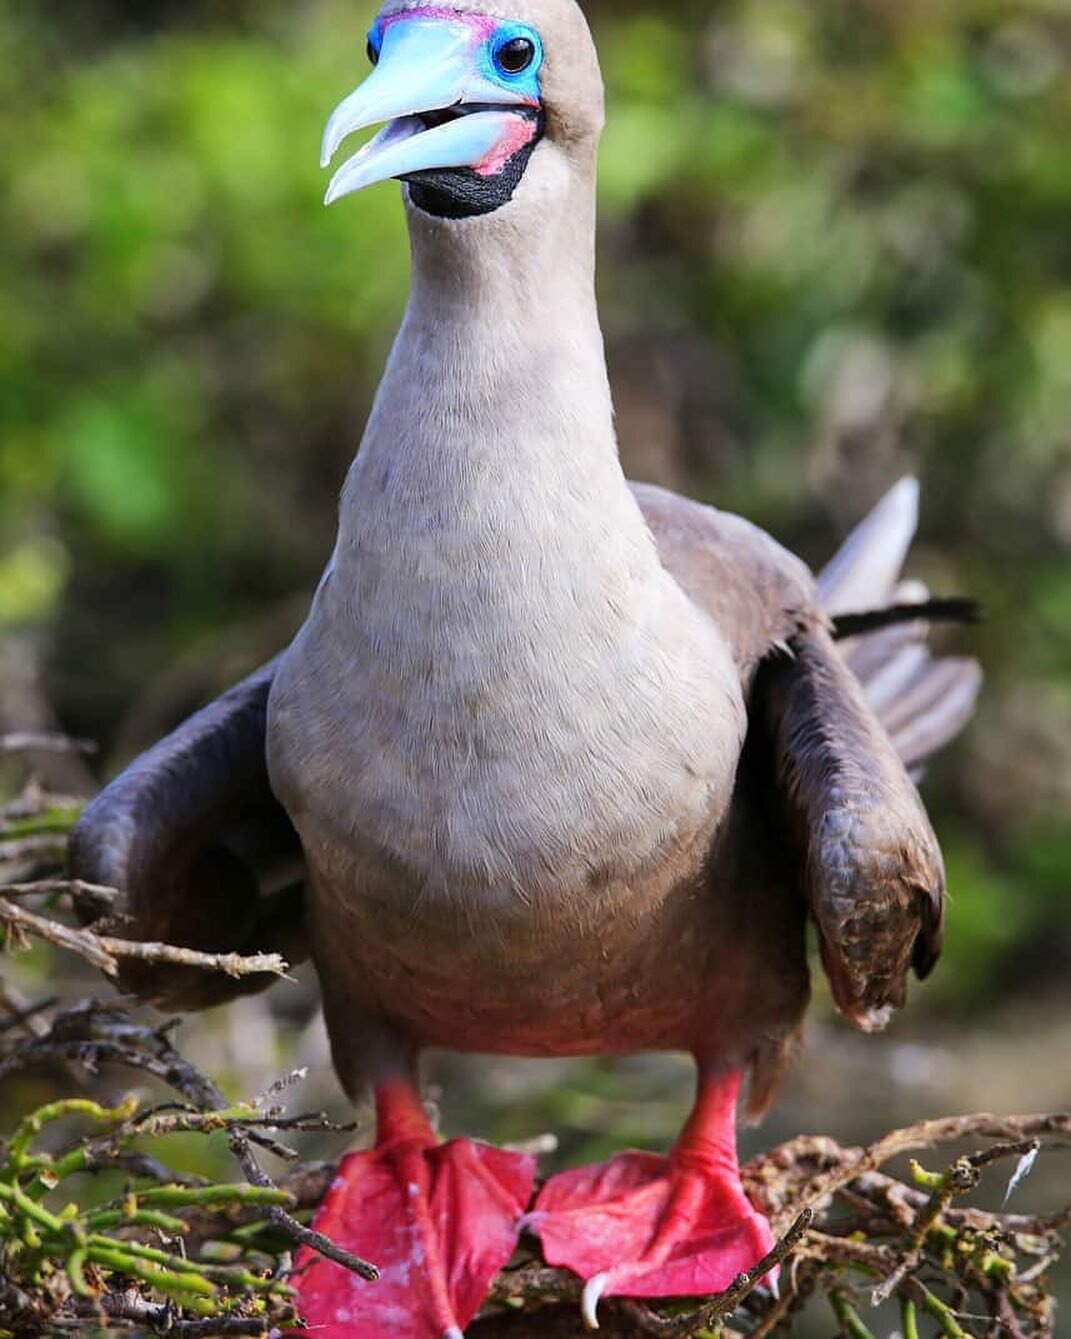 Happy Valentine&rsquo;s Day everyone. Here&rsquo;s a photo of a red-footed booby! And yes, one day we&rsquo;ll make red-footed booby socks for Valentine&rsquo;s Day! 

#redfootedbooby #bluefootedbooby #conservation #seabirds #bluesocks #redsocks #val